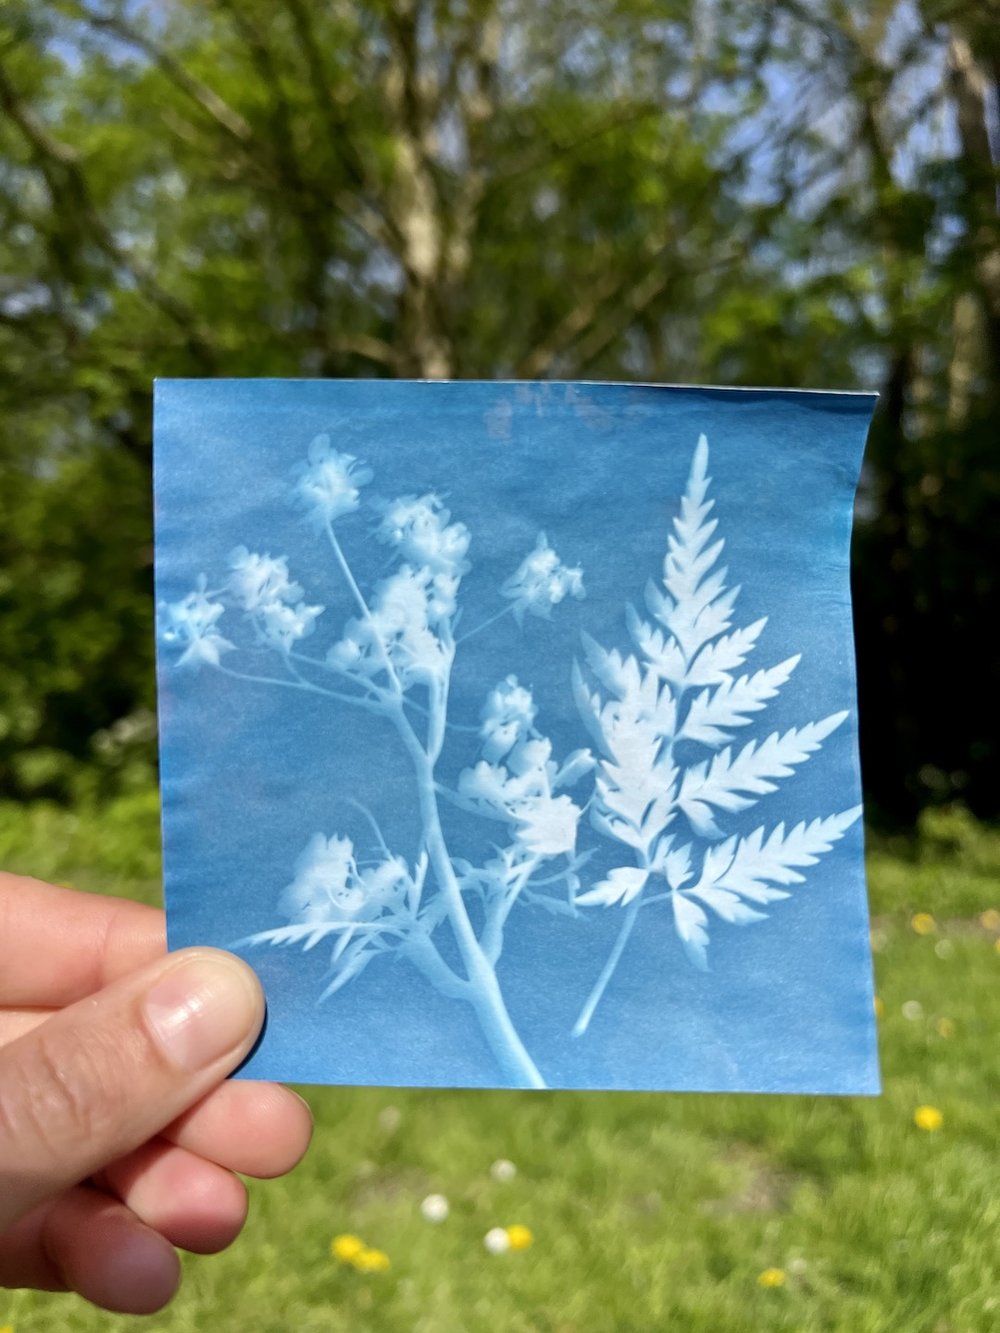 Print Making with Cyanotype